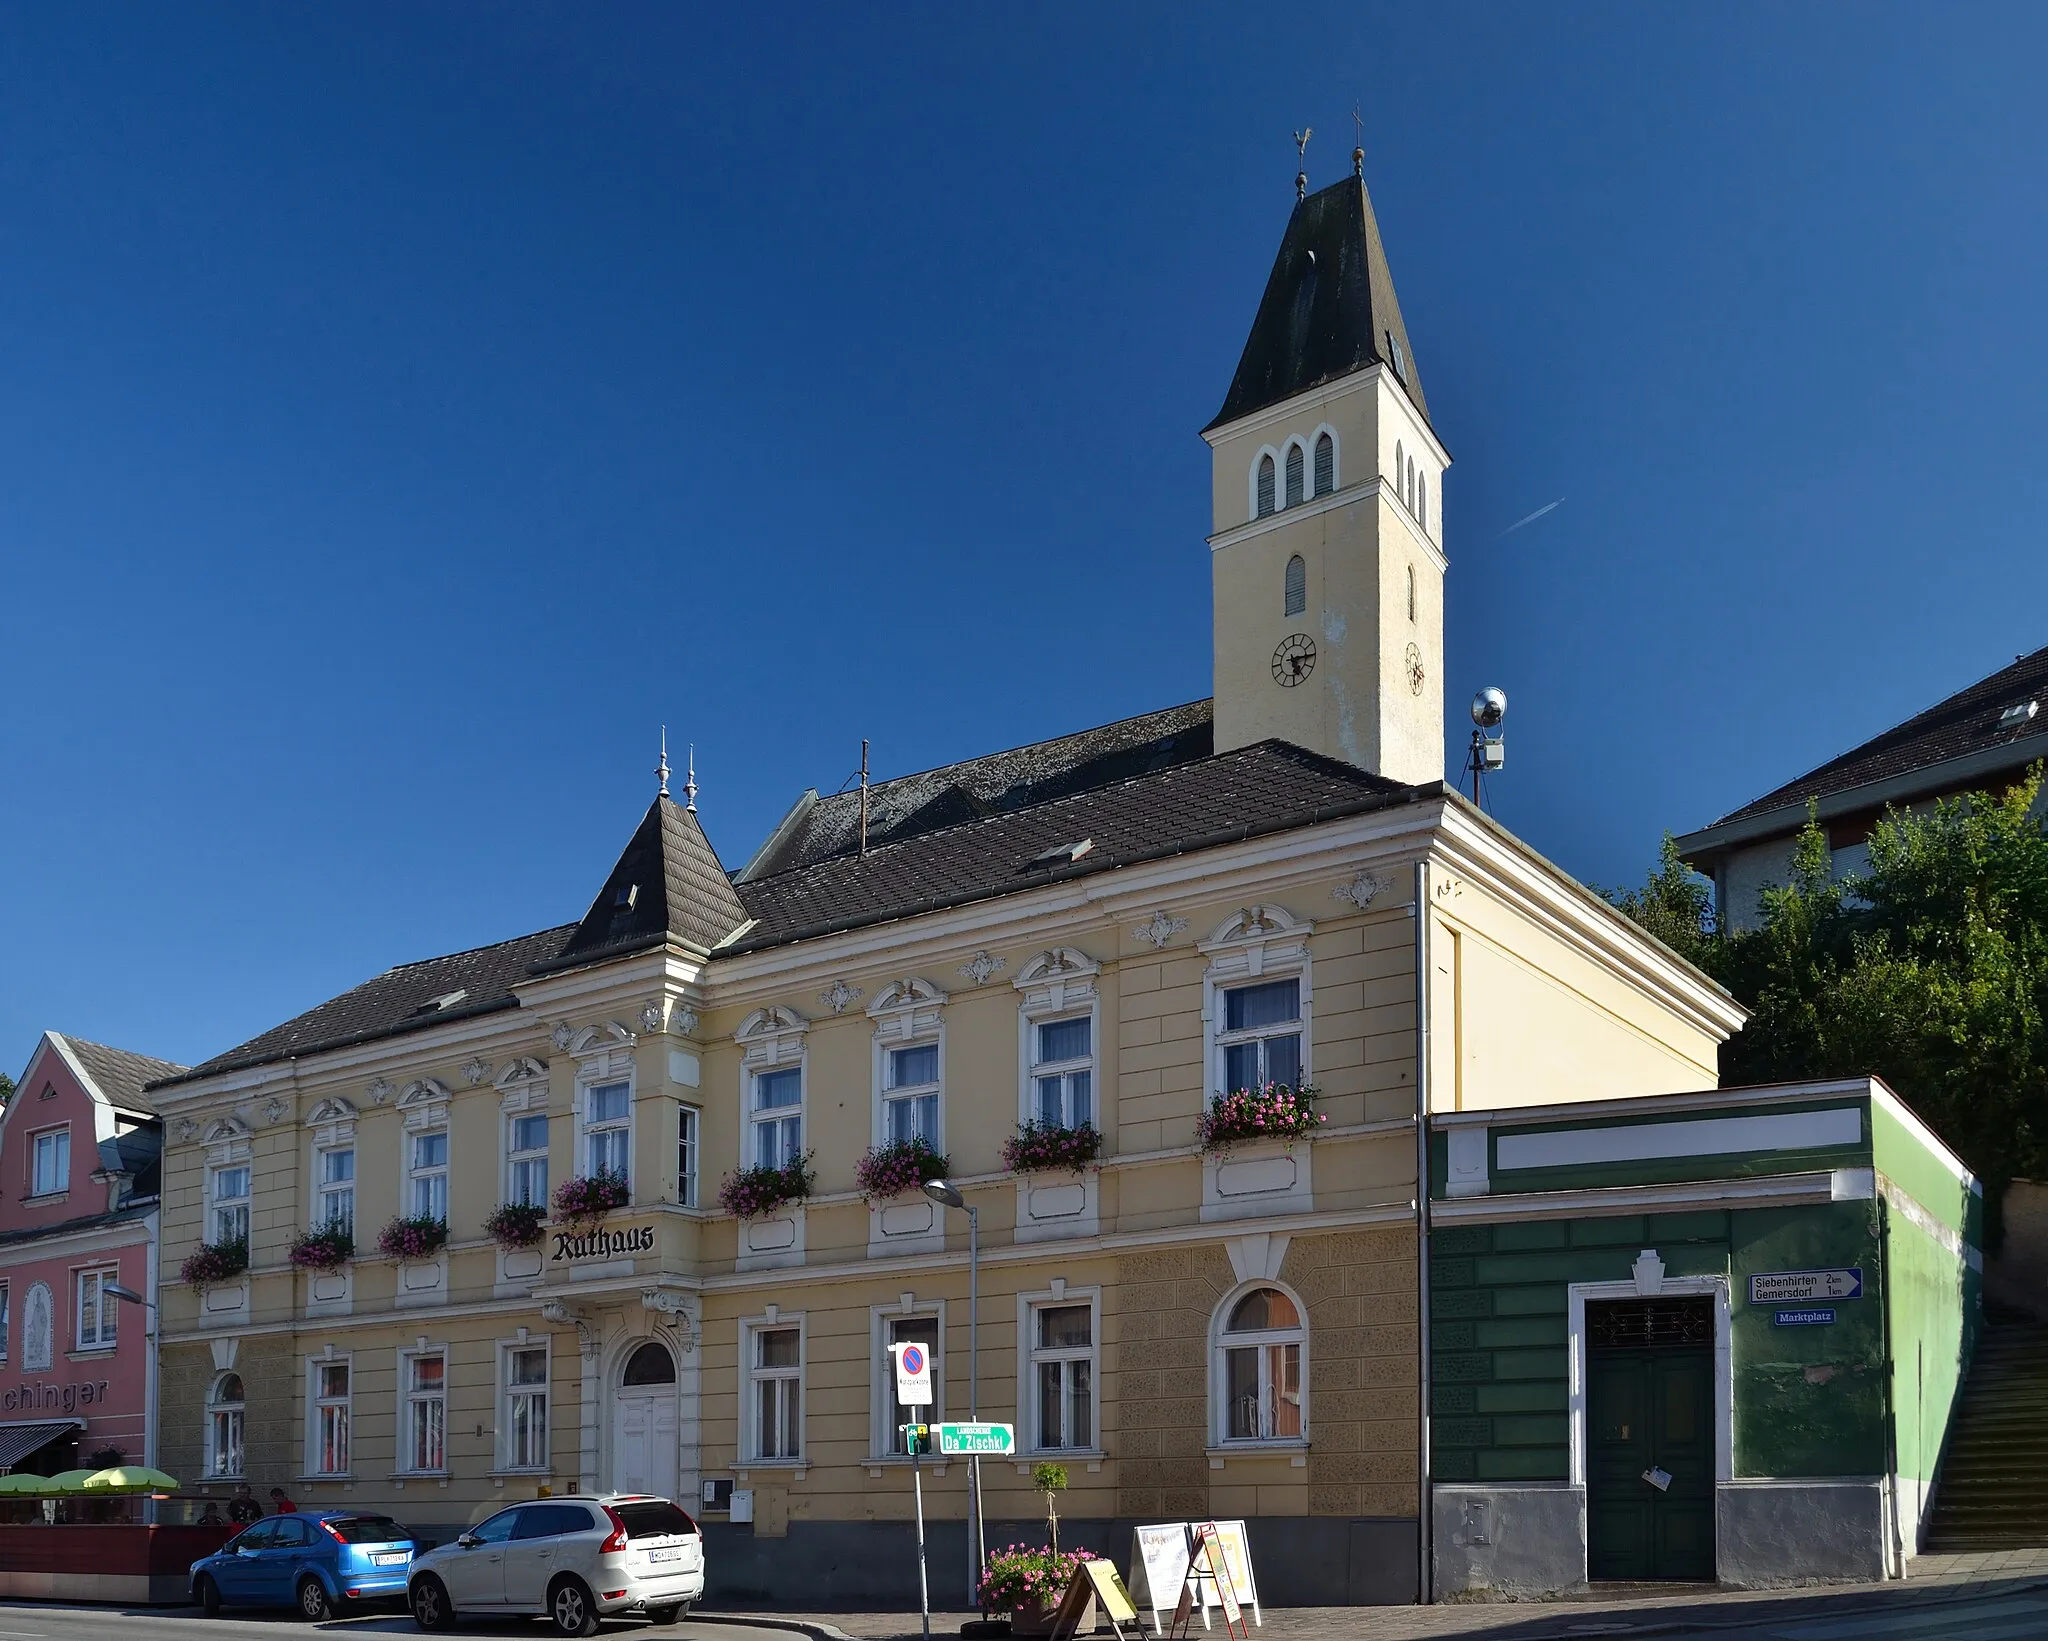 Photo showing: The town hall / municipal office of Böheimkirchen, Lower Austria, originates from the beginning of the 20th century and is protected as a cultural heritage monument. In the background the parish church St. James the Greater, which is also protected.